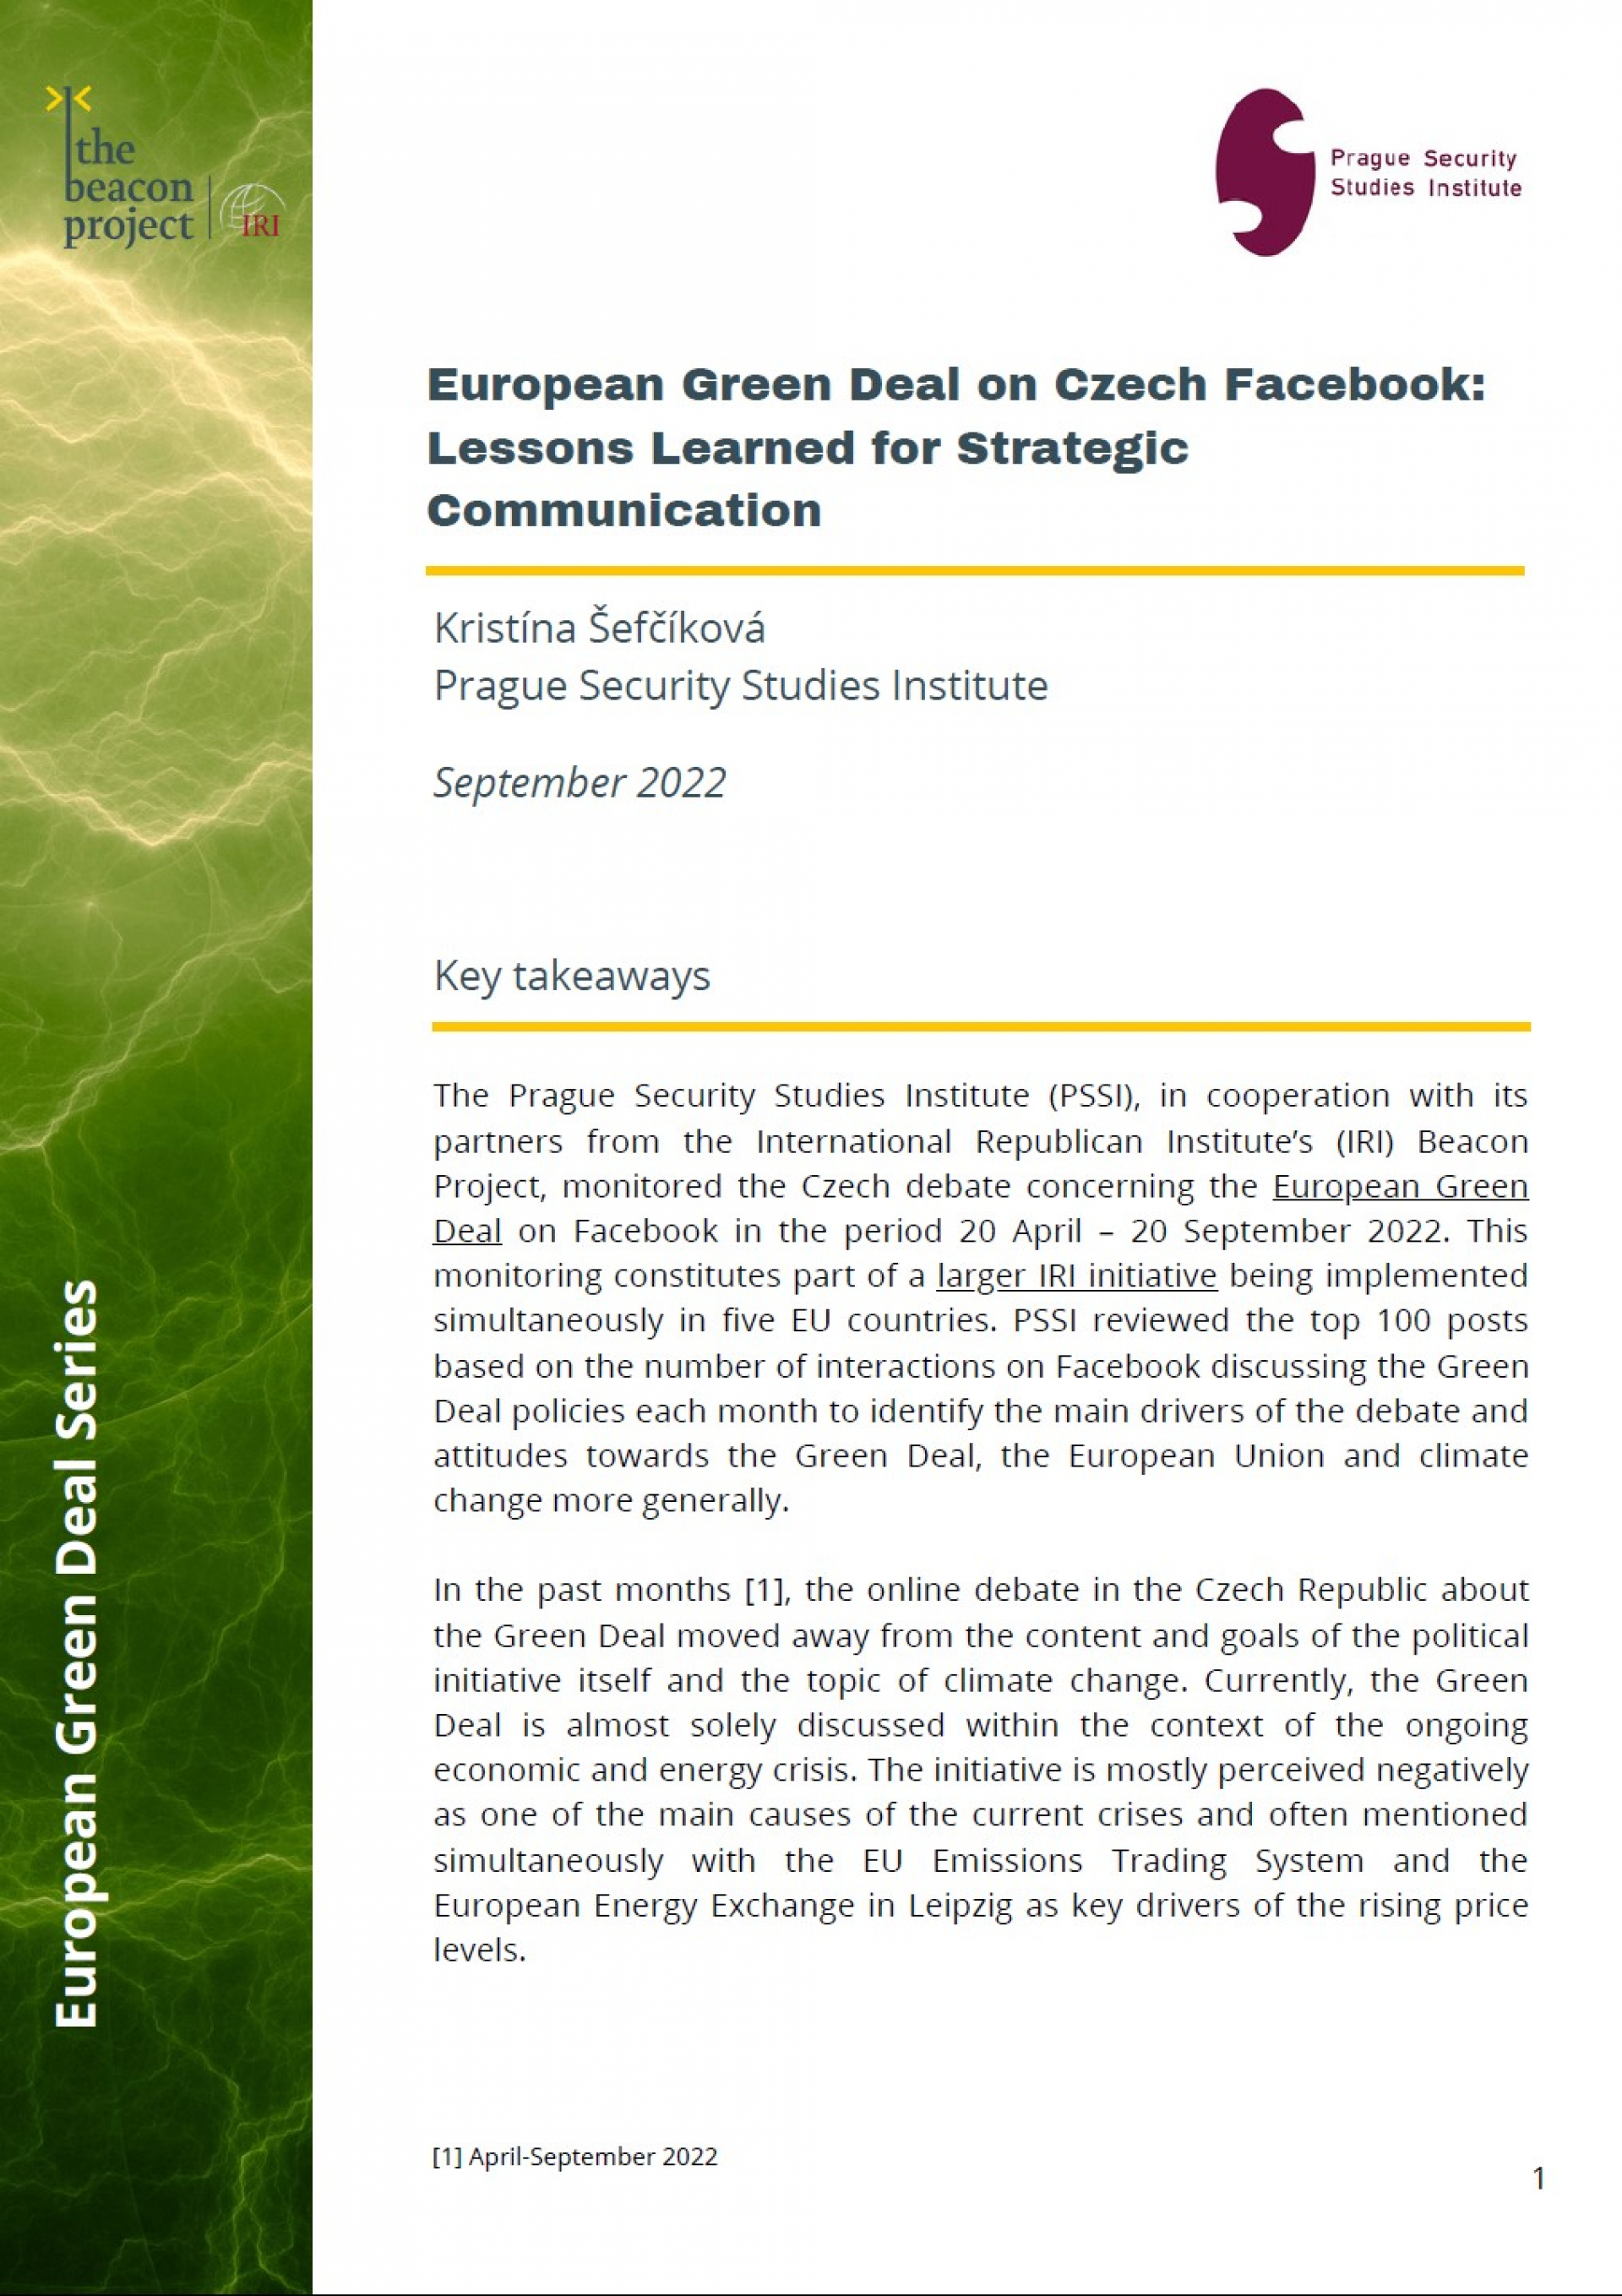 9991_european-green-deal-on-czech-facebook-lessons-learned-for-strategic-communicationcoverpage2